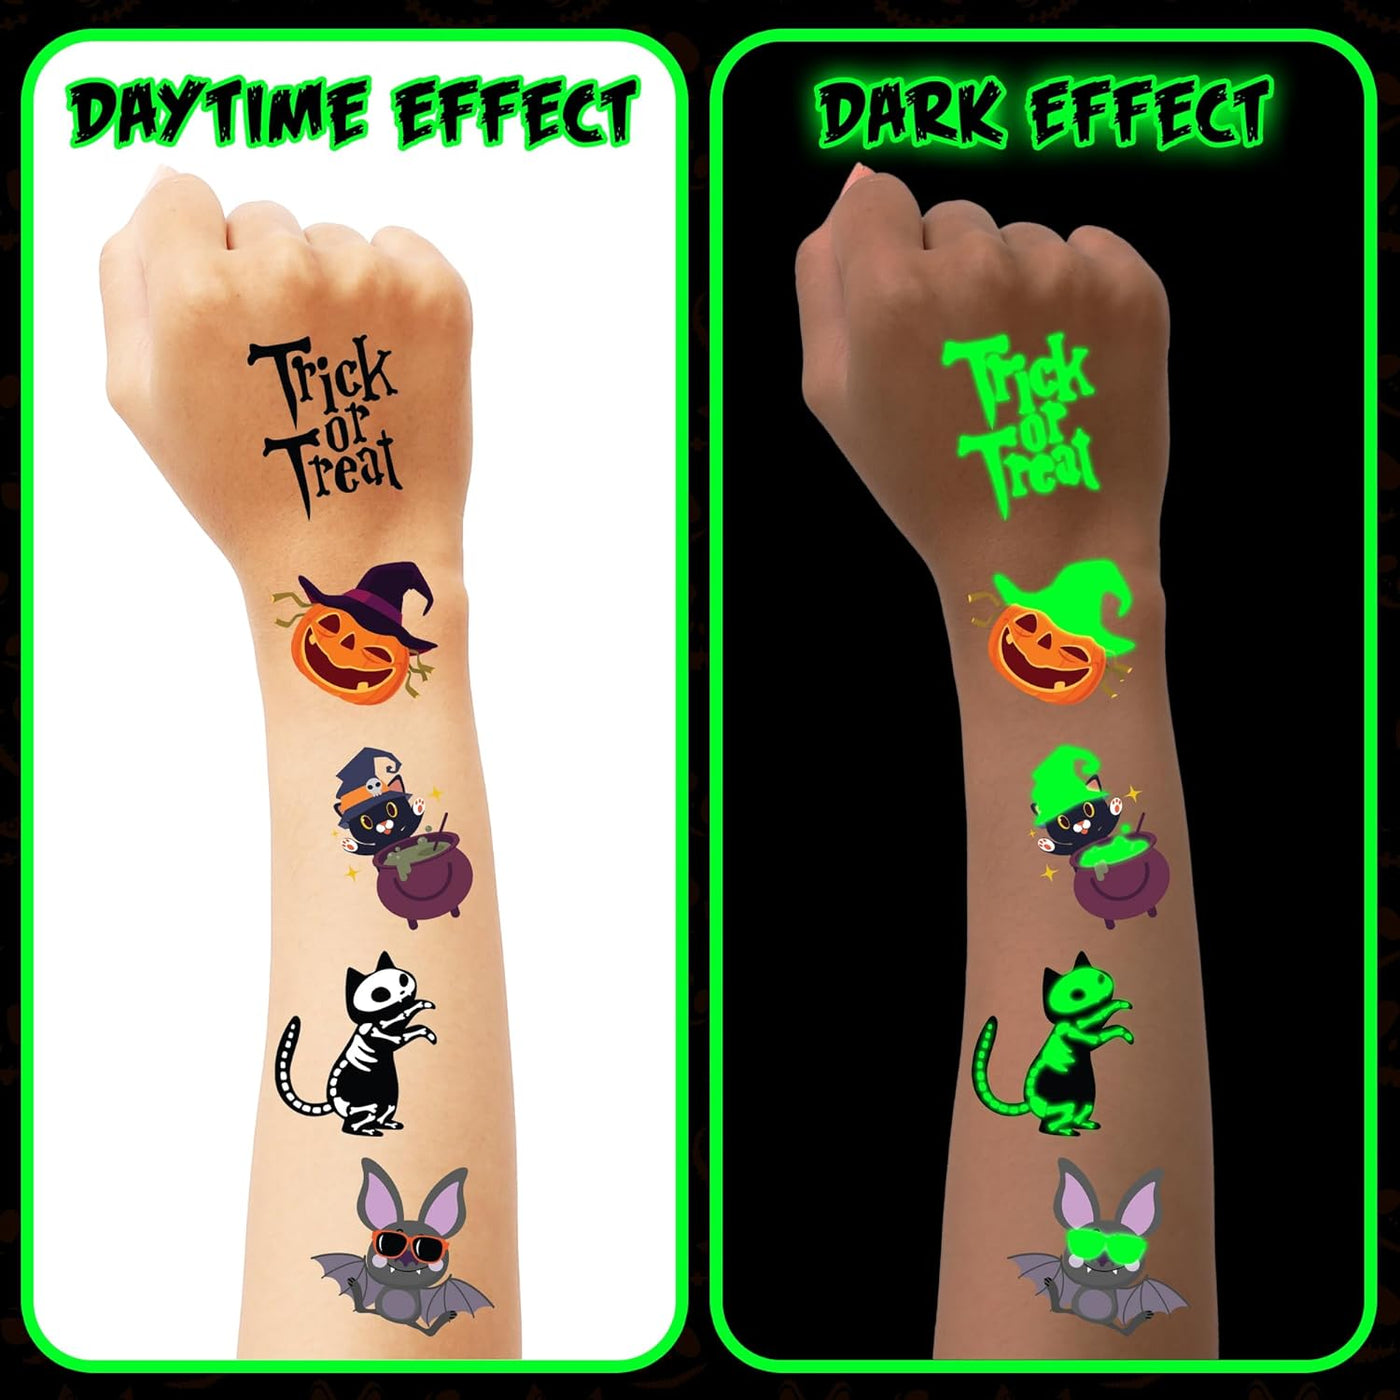 Halloween Glow in the Dark Temporary Tattoos, Set of 144, Temporary Tats for Kids in 12 Spooky Designs, Easy to Apply & Remove